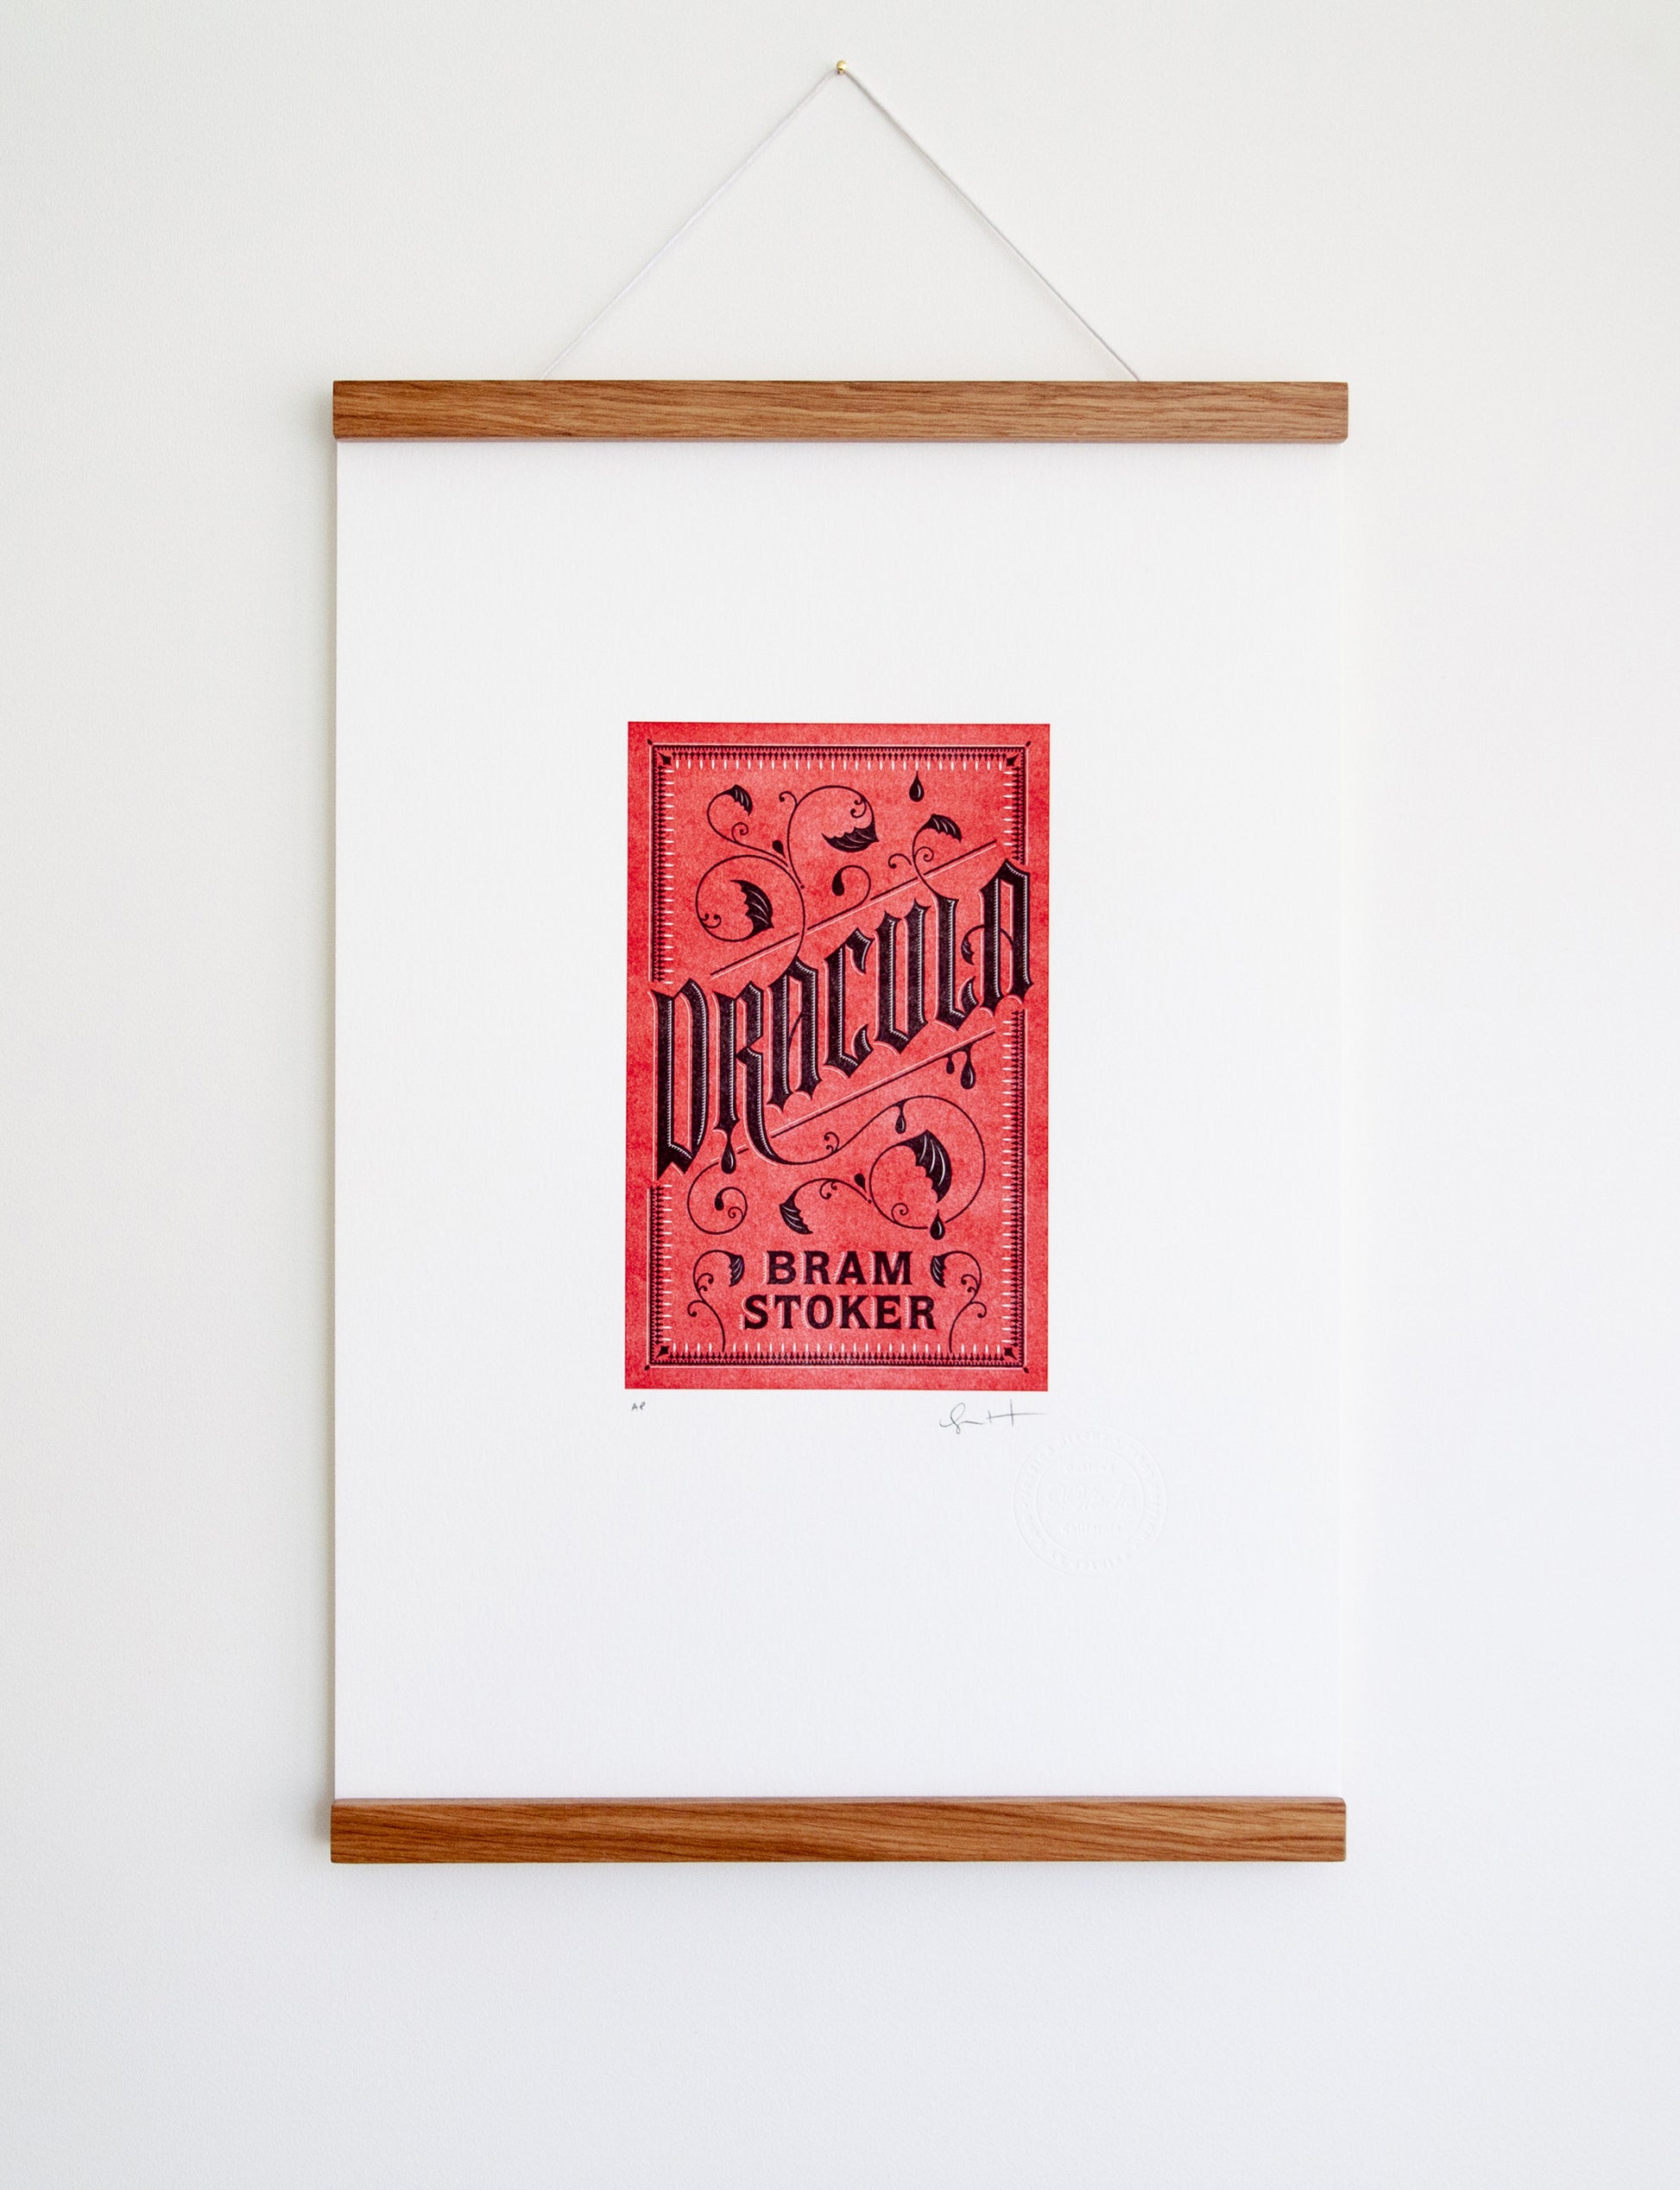 Framed 2-color letterpress print in red and black. Printed artwork is an illustrated book cover of Dracula including custom hand lettering.